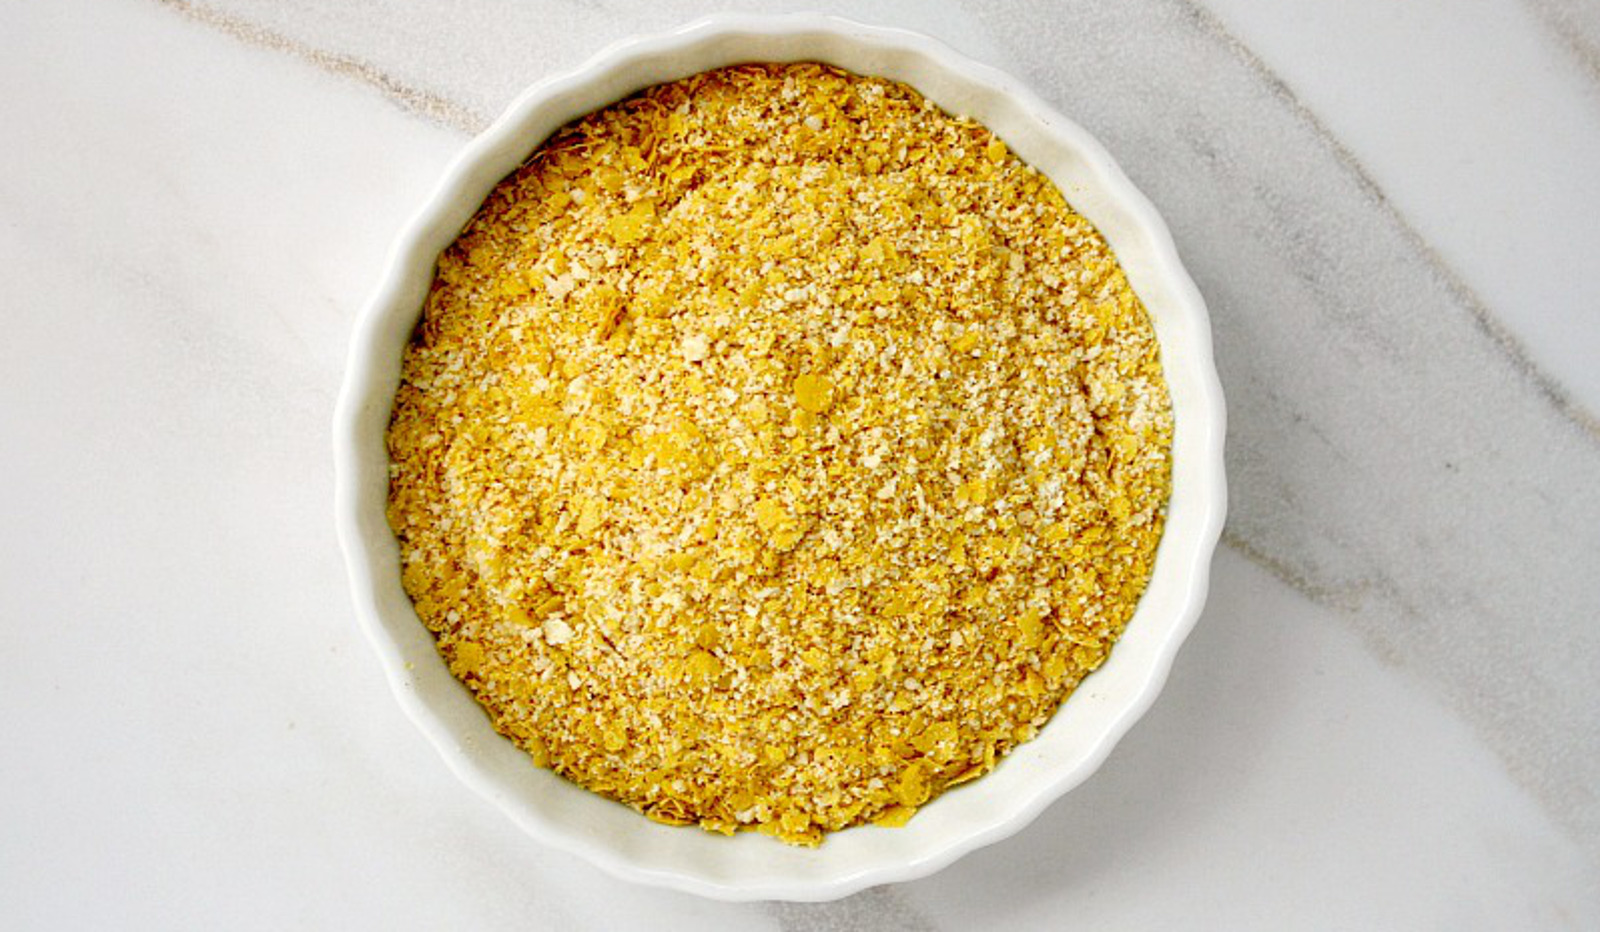 How To Make Gluten-Free Bread Crumbs